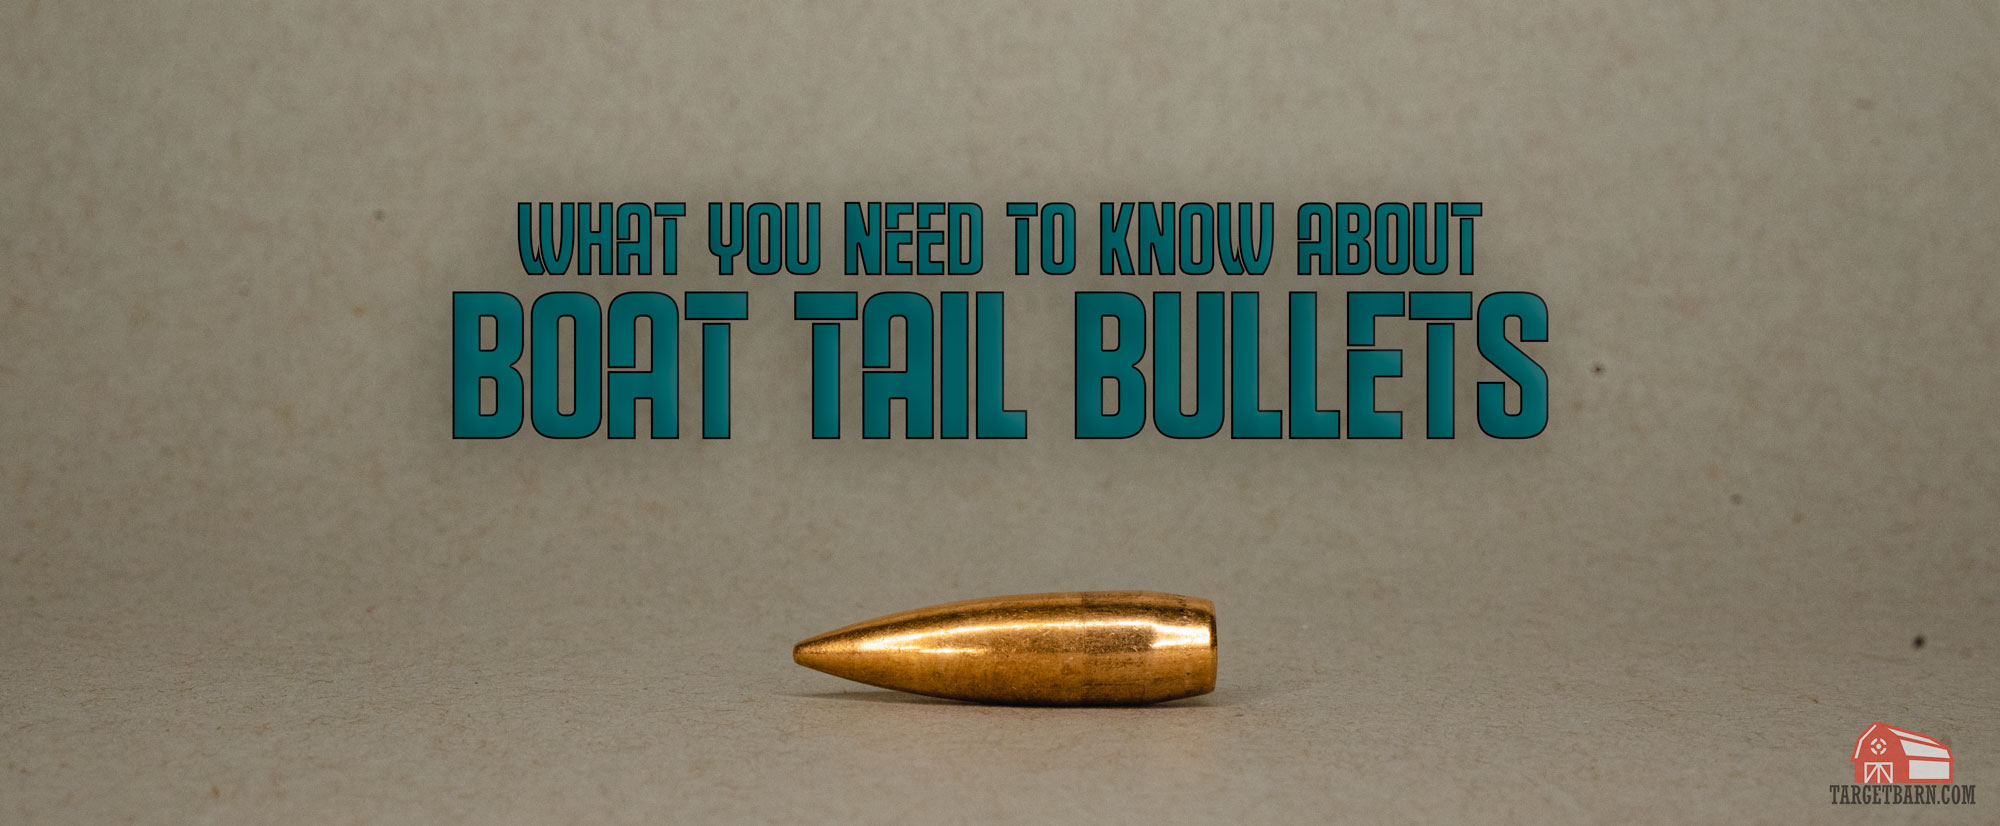 Boat Tail Bullets - What Are They? - The Broad Side